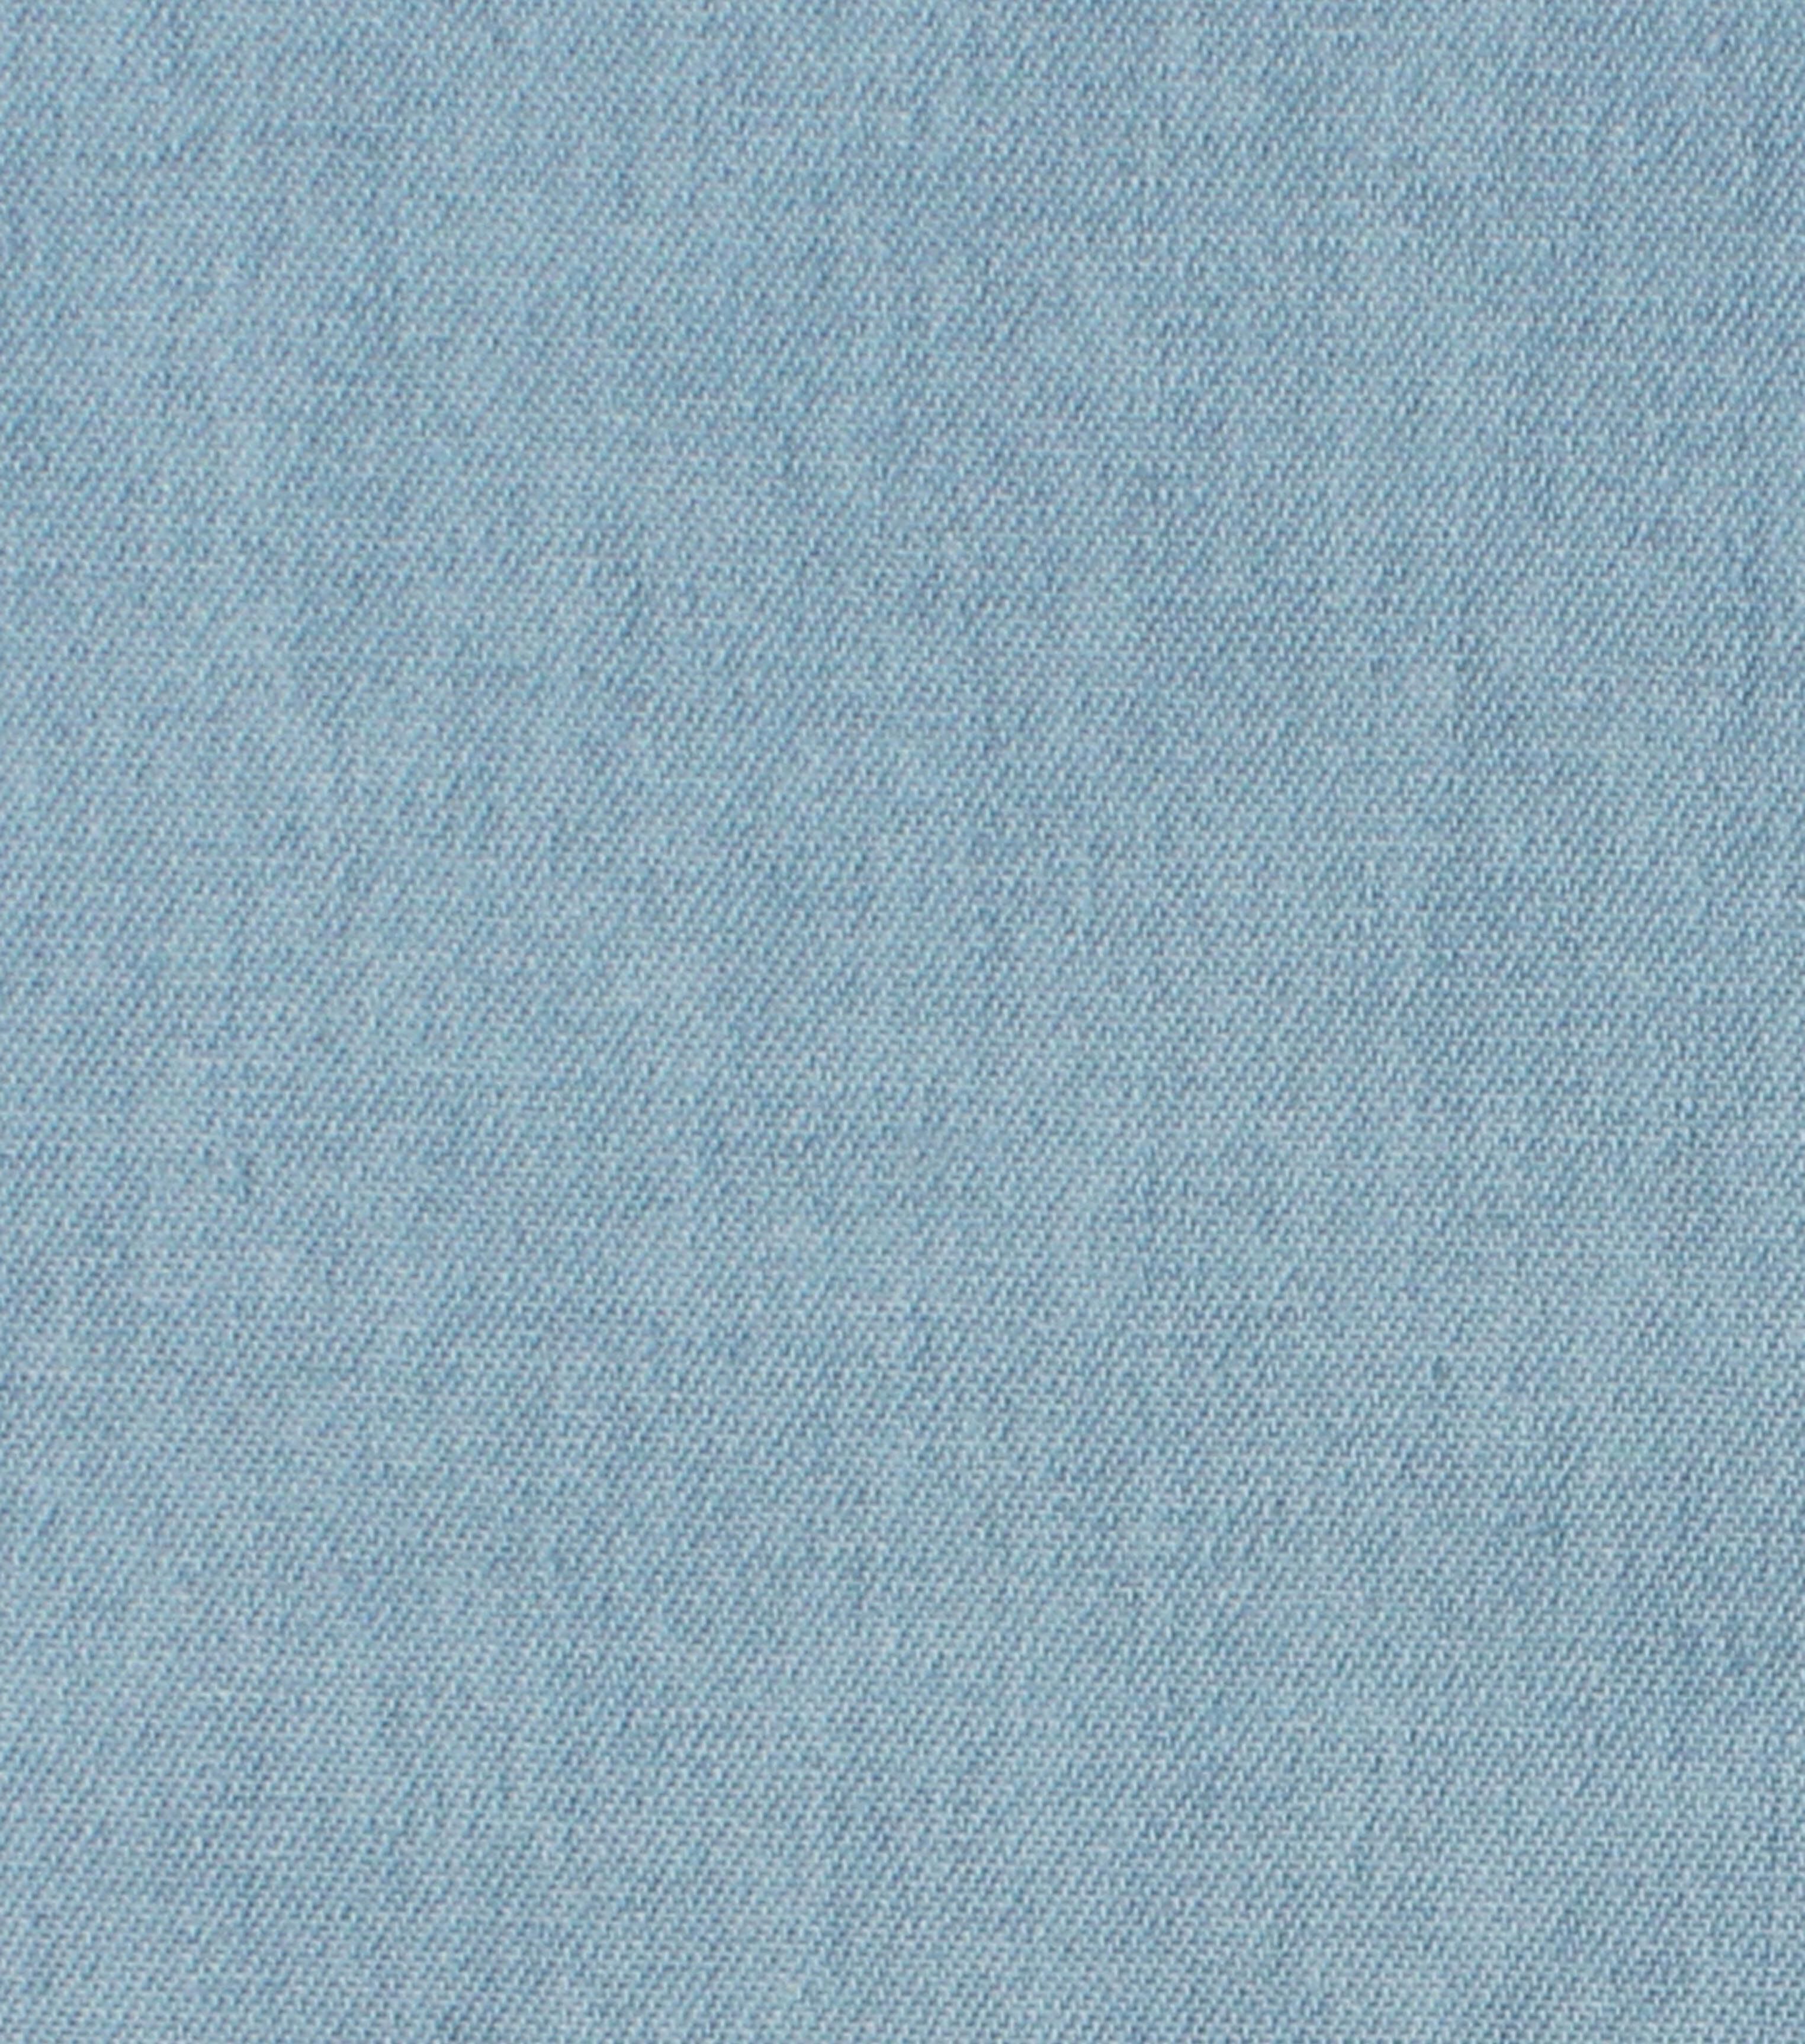 Buy Light Blue Washed Preshrunk Upholstery Grade Denim Fabric by the Yard  Pattern E674 Online in India - Etsy